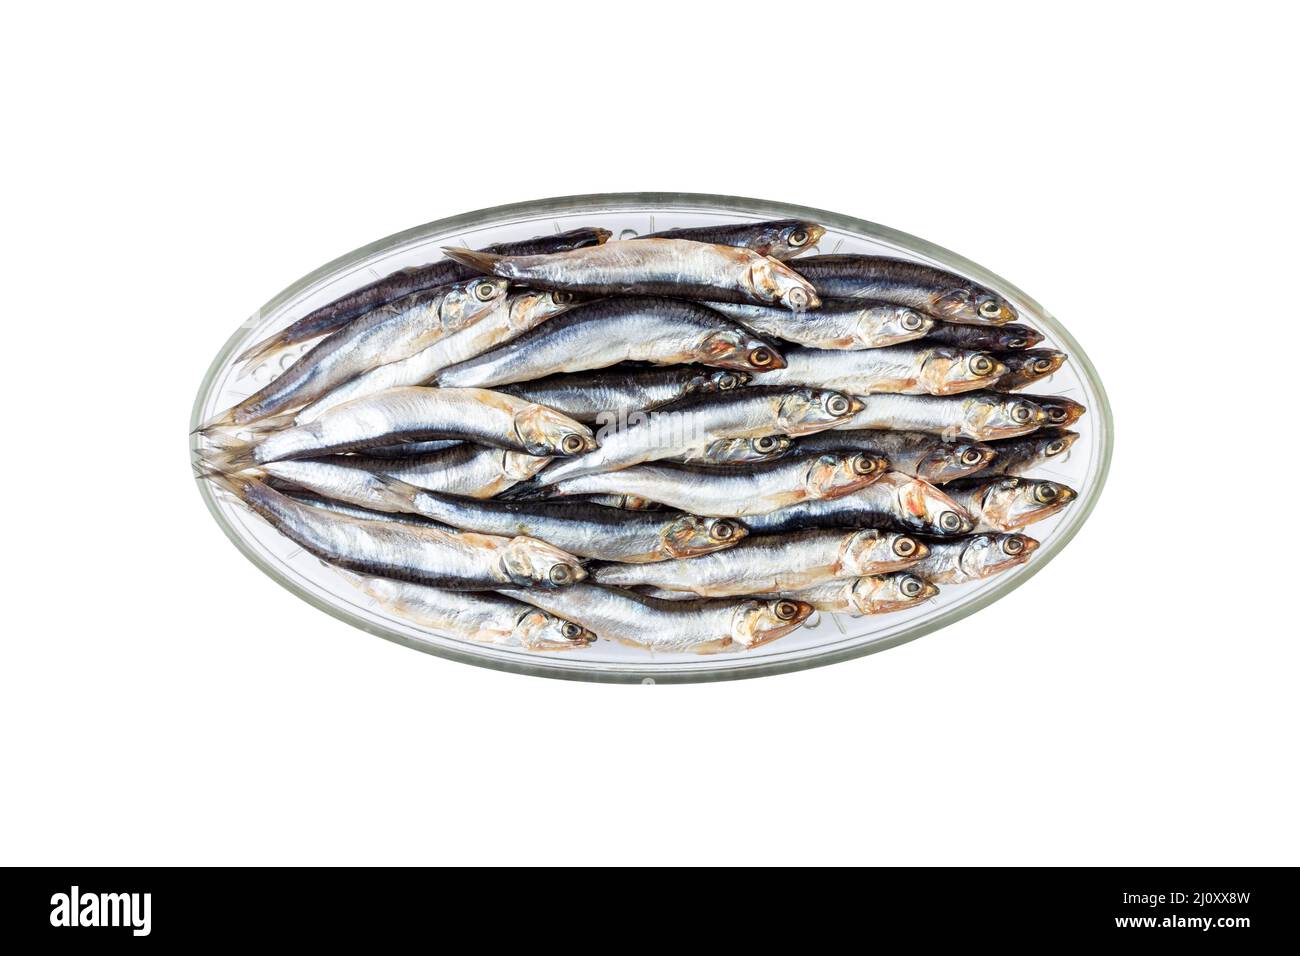 Salted fish european anchovy on an oval glass plate  isolated on a white background close-up top view Stock Photo